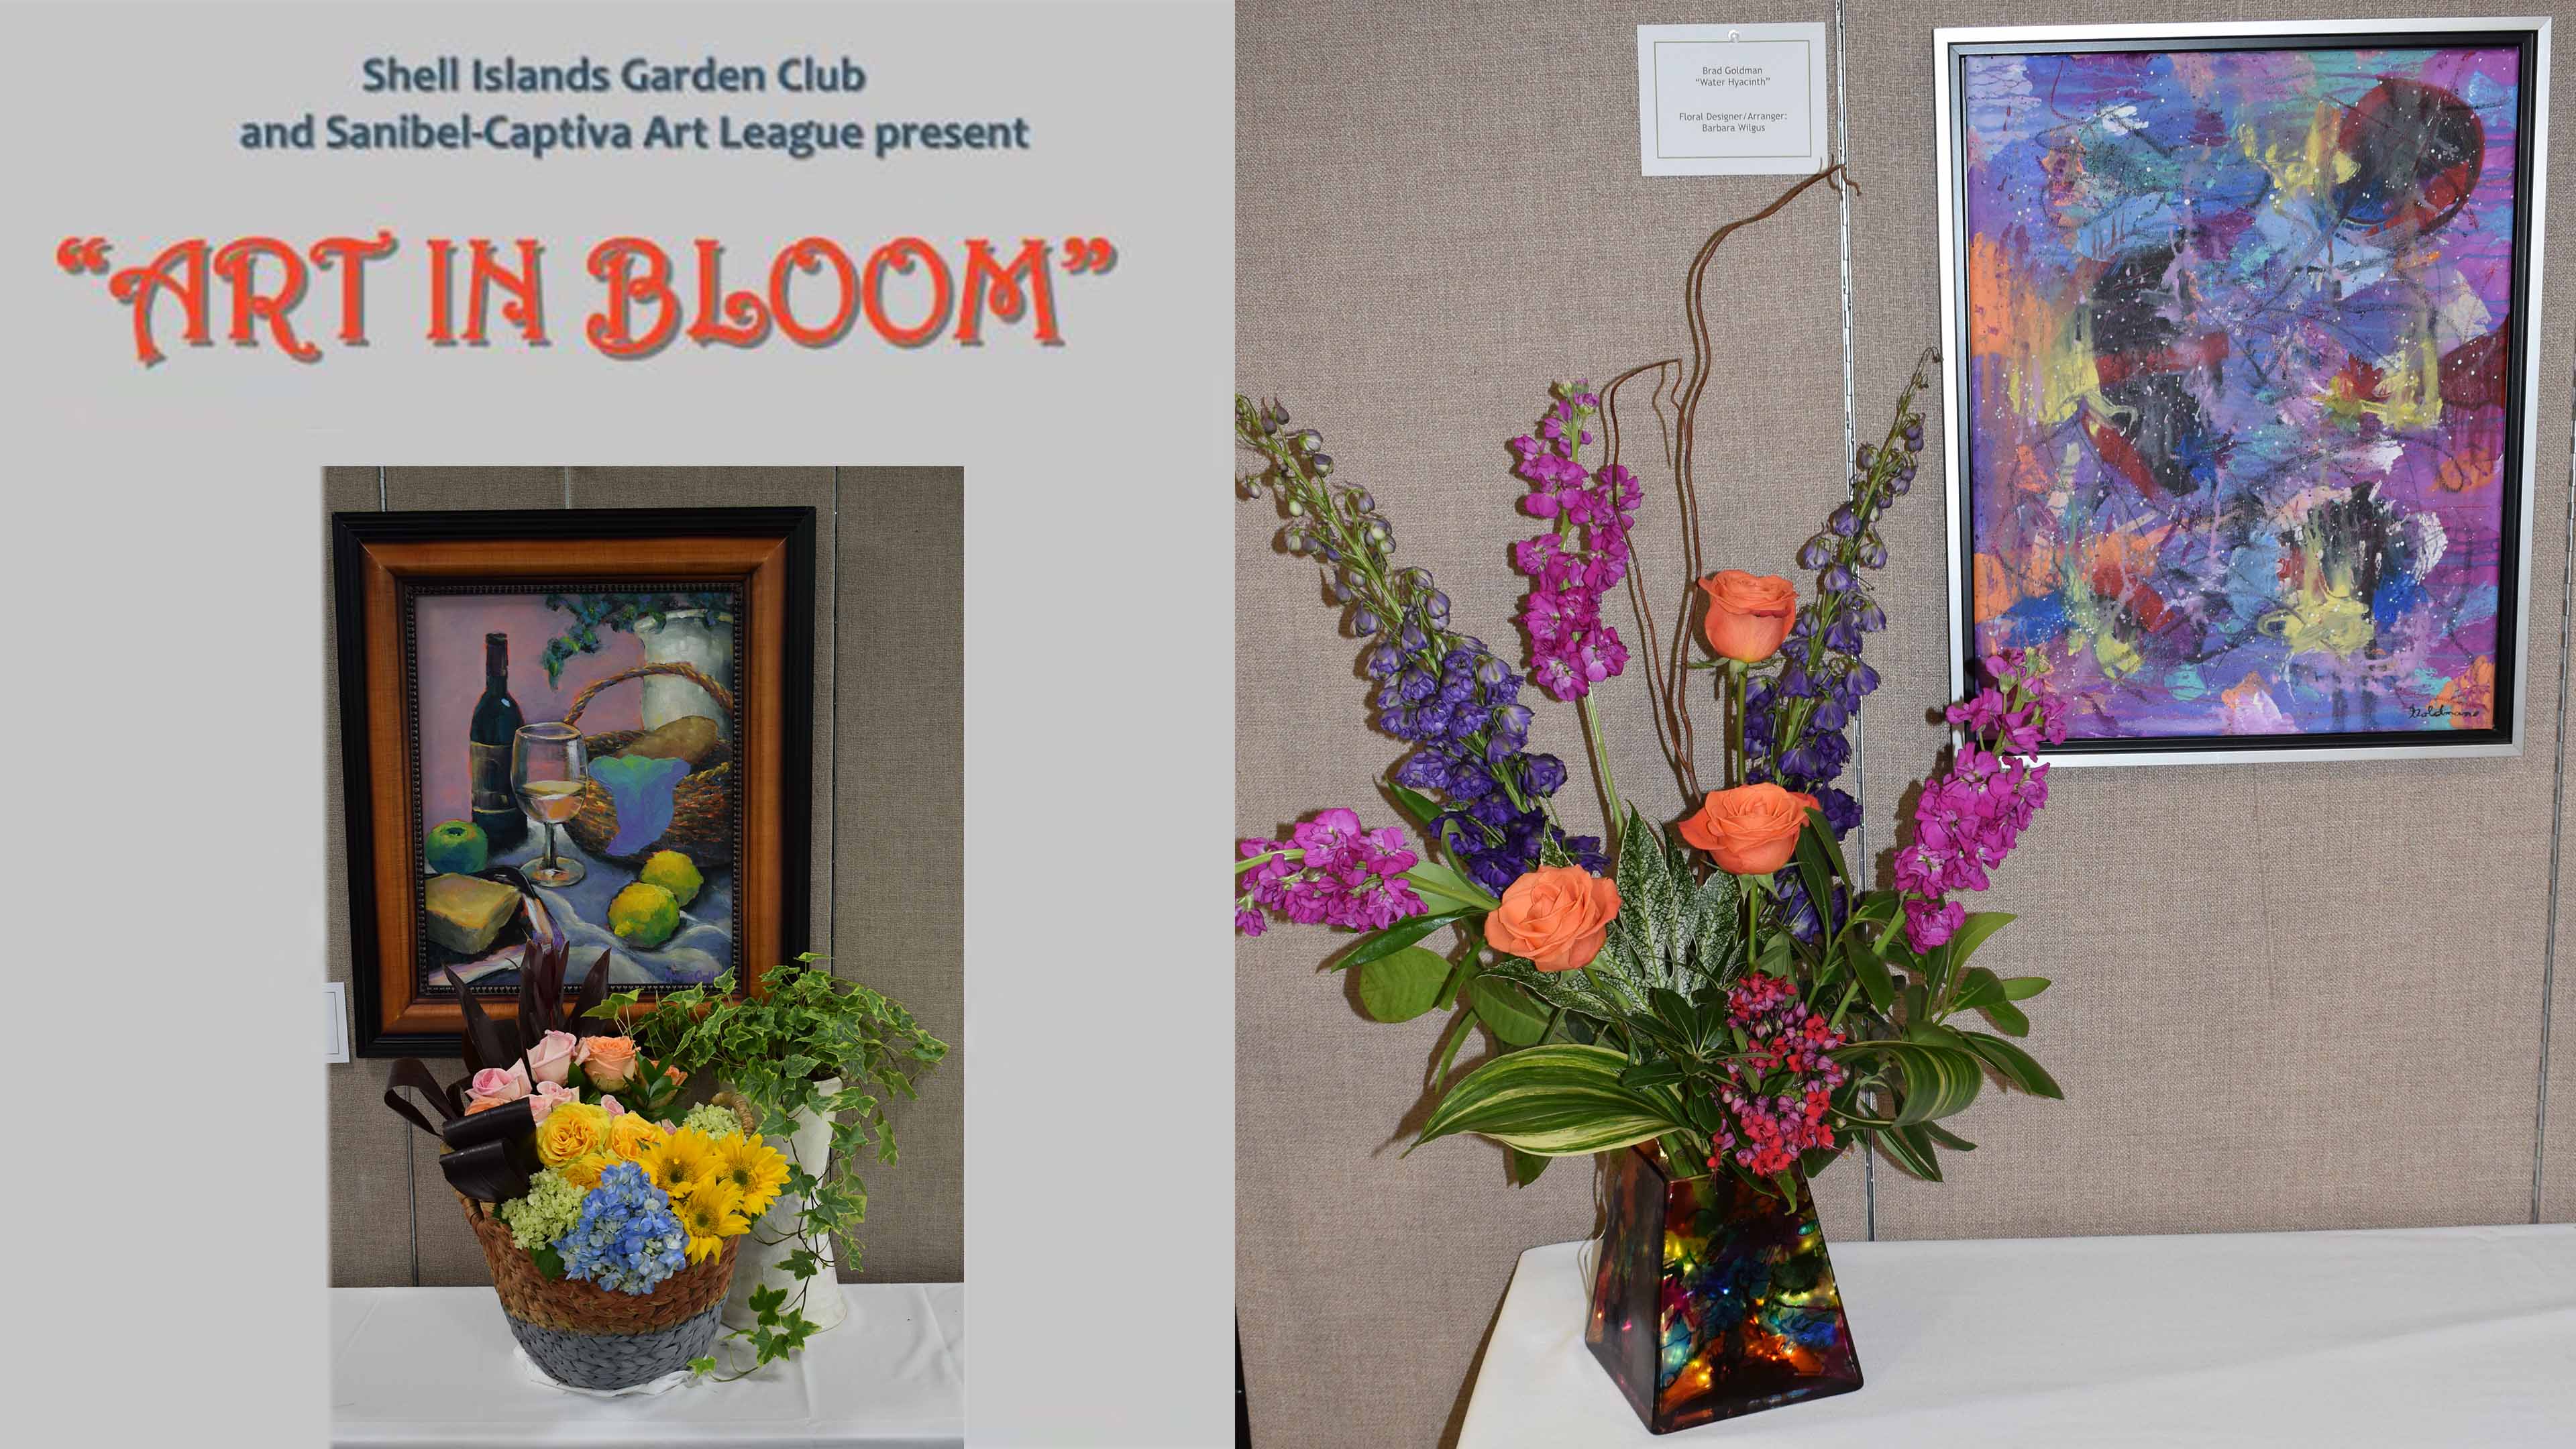 Shell Islands Garden Club members will create interpretive floral arrangements based on paintings by artists from Sanibel-Captiva Art League